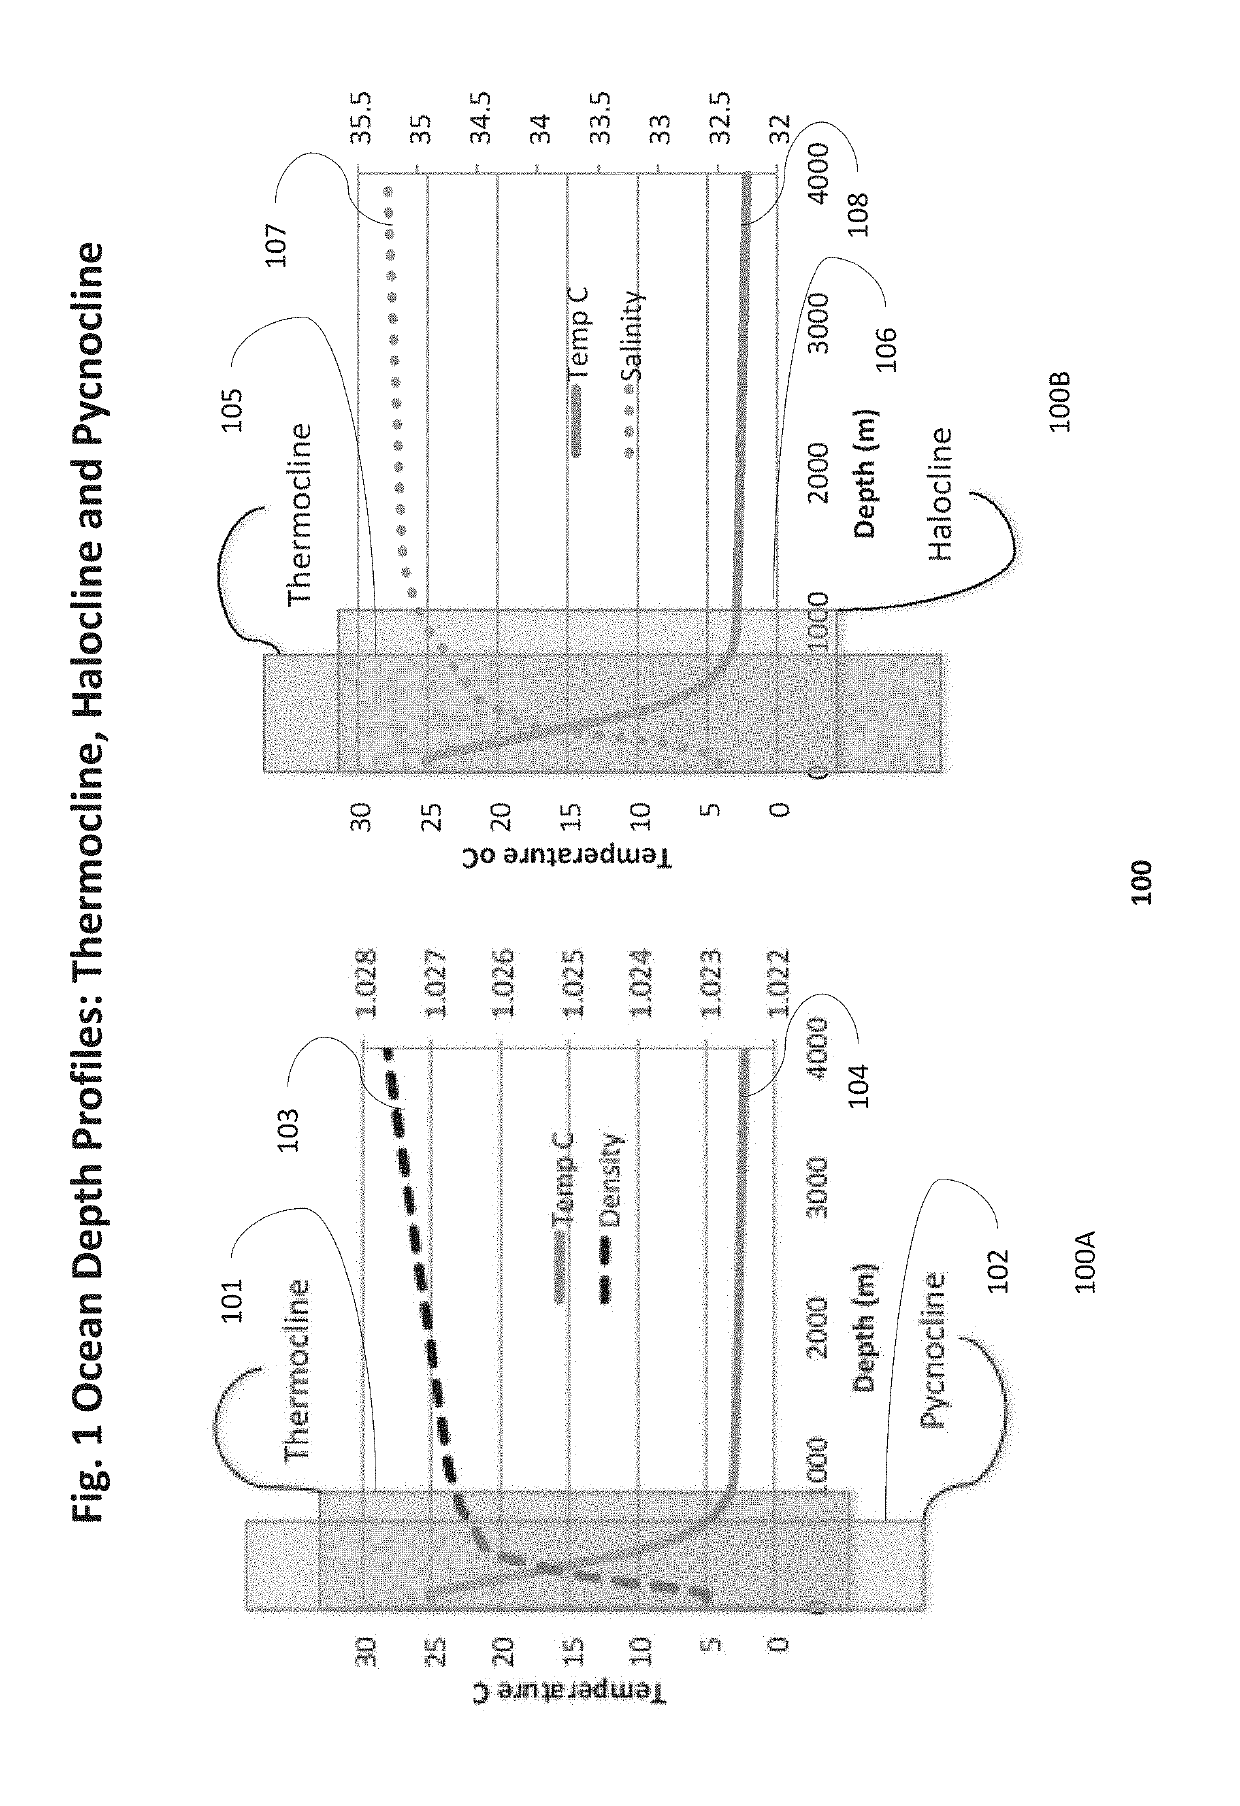 Surface modification control stations and methods in a globally distributed array for dynamically adjusting the atmospheric, terrestrial and oceanic properties